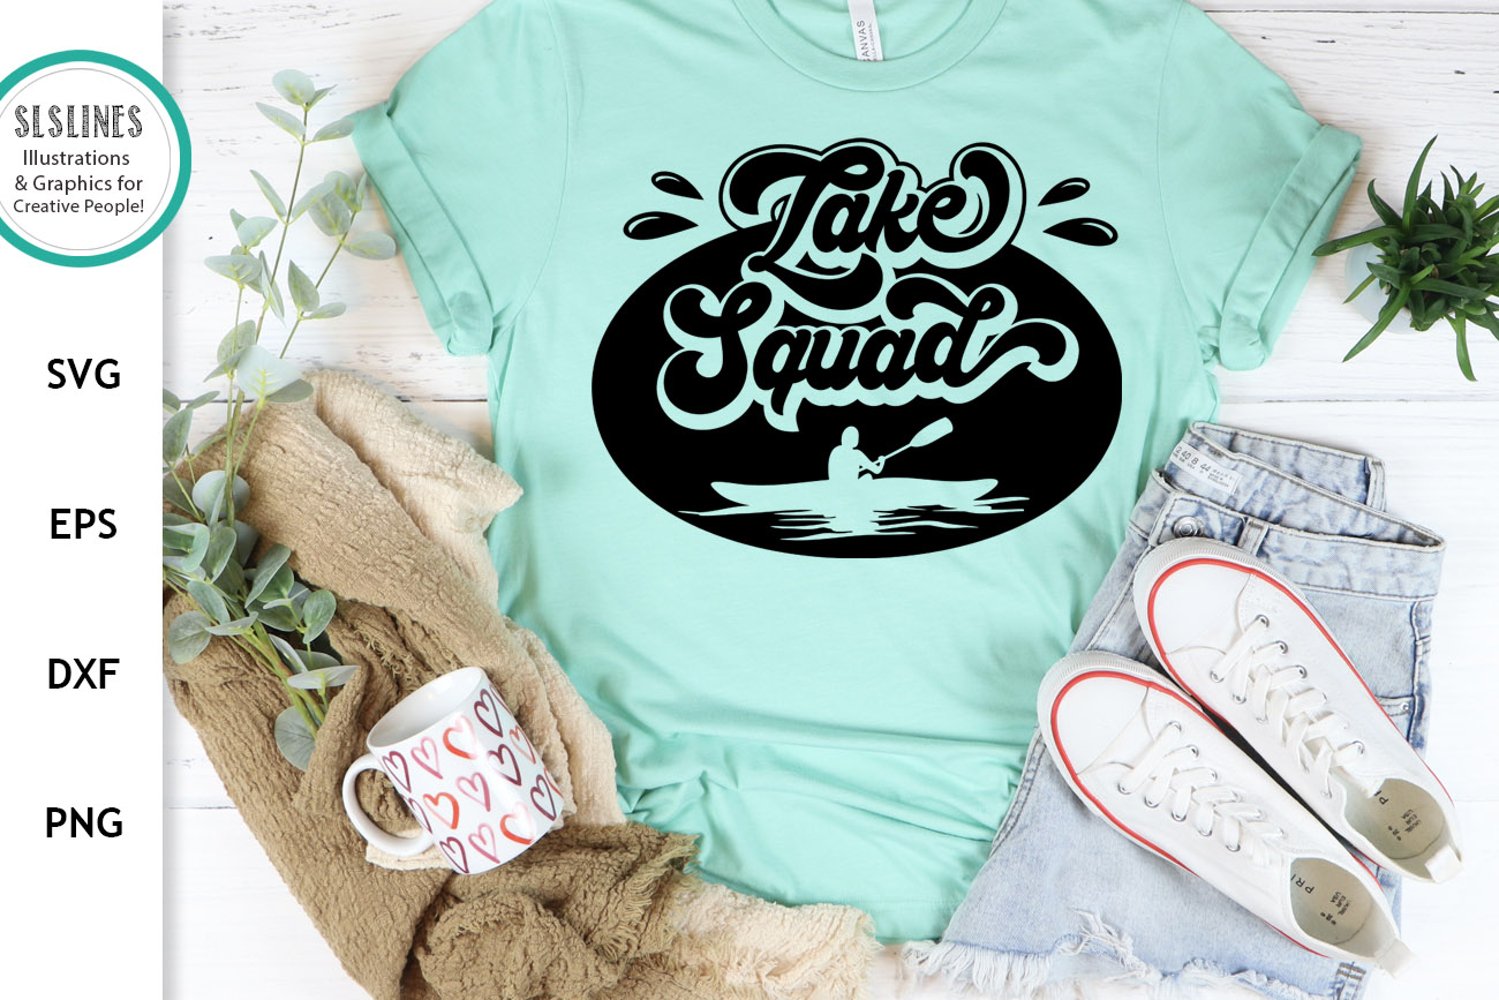 Be the part of lake squad.